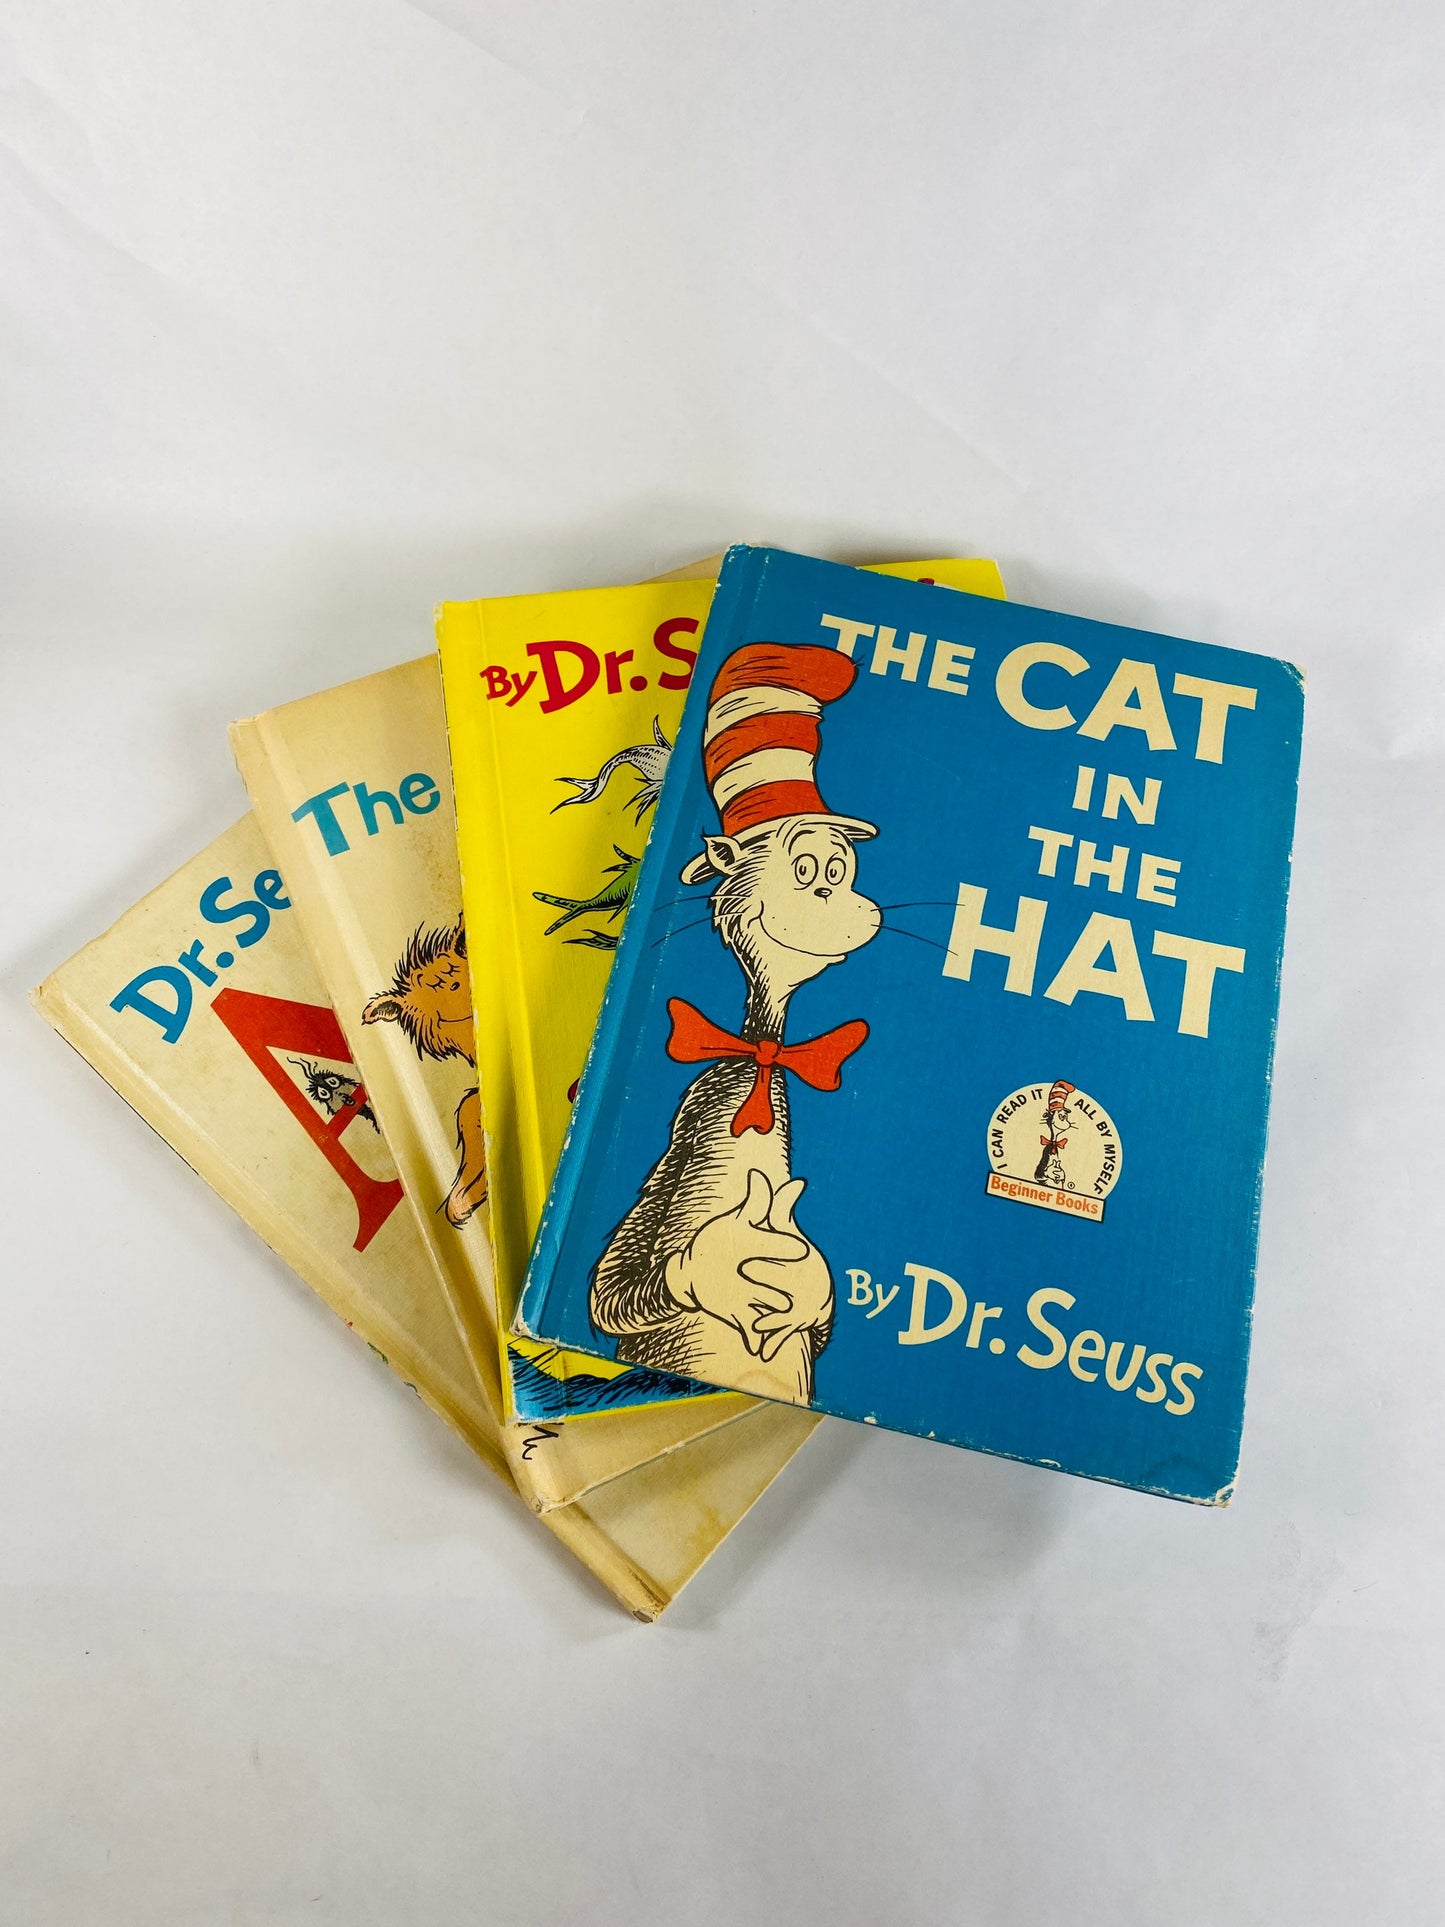 Dr Seuss vintage I Can Read Beginner Books circa 1963 Pick one! Cat in the Hat One fish Foot ABC